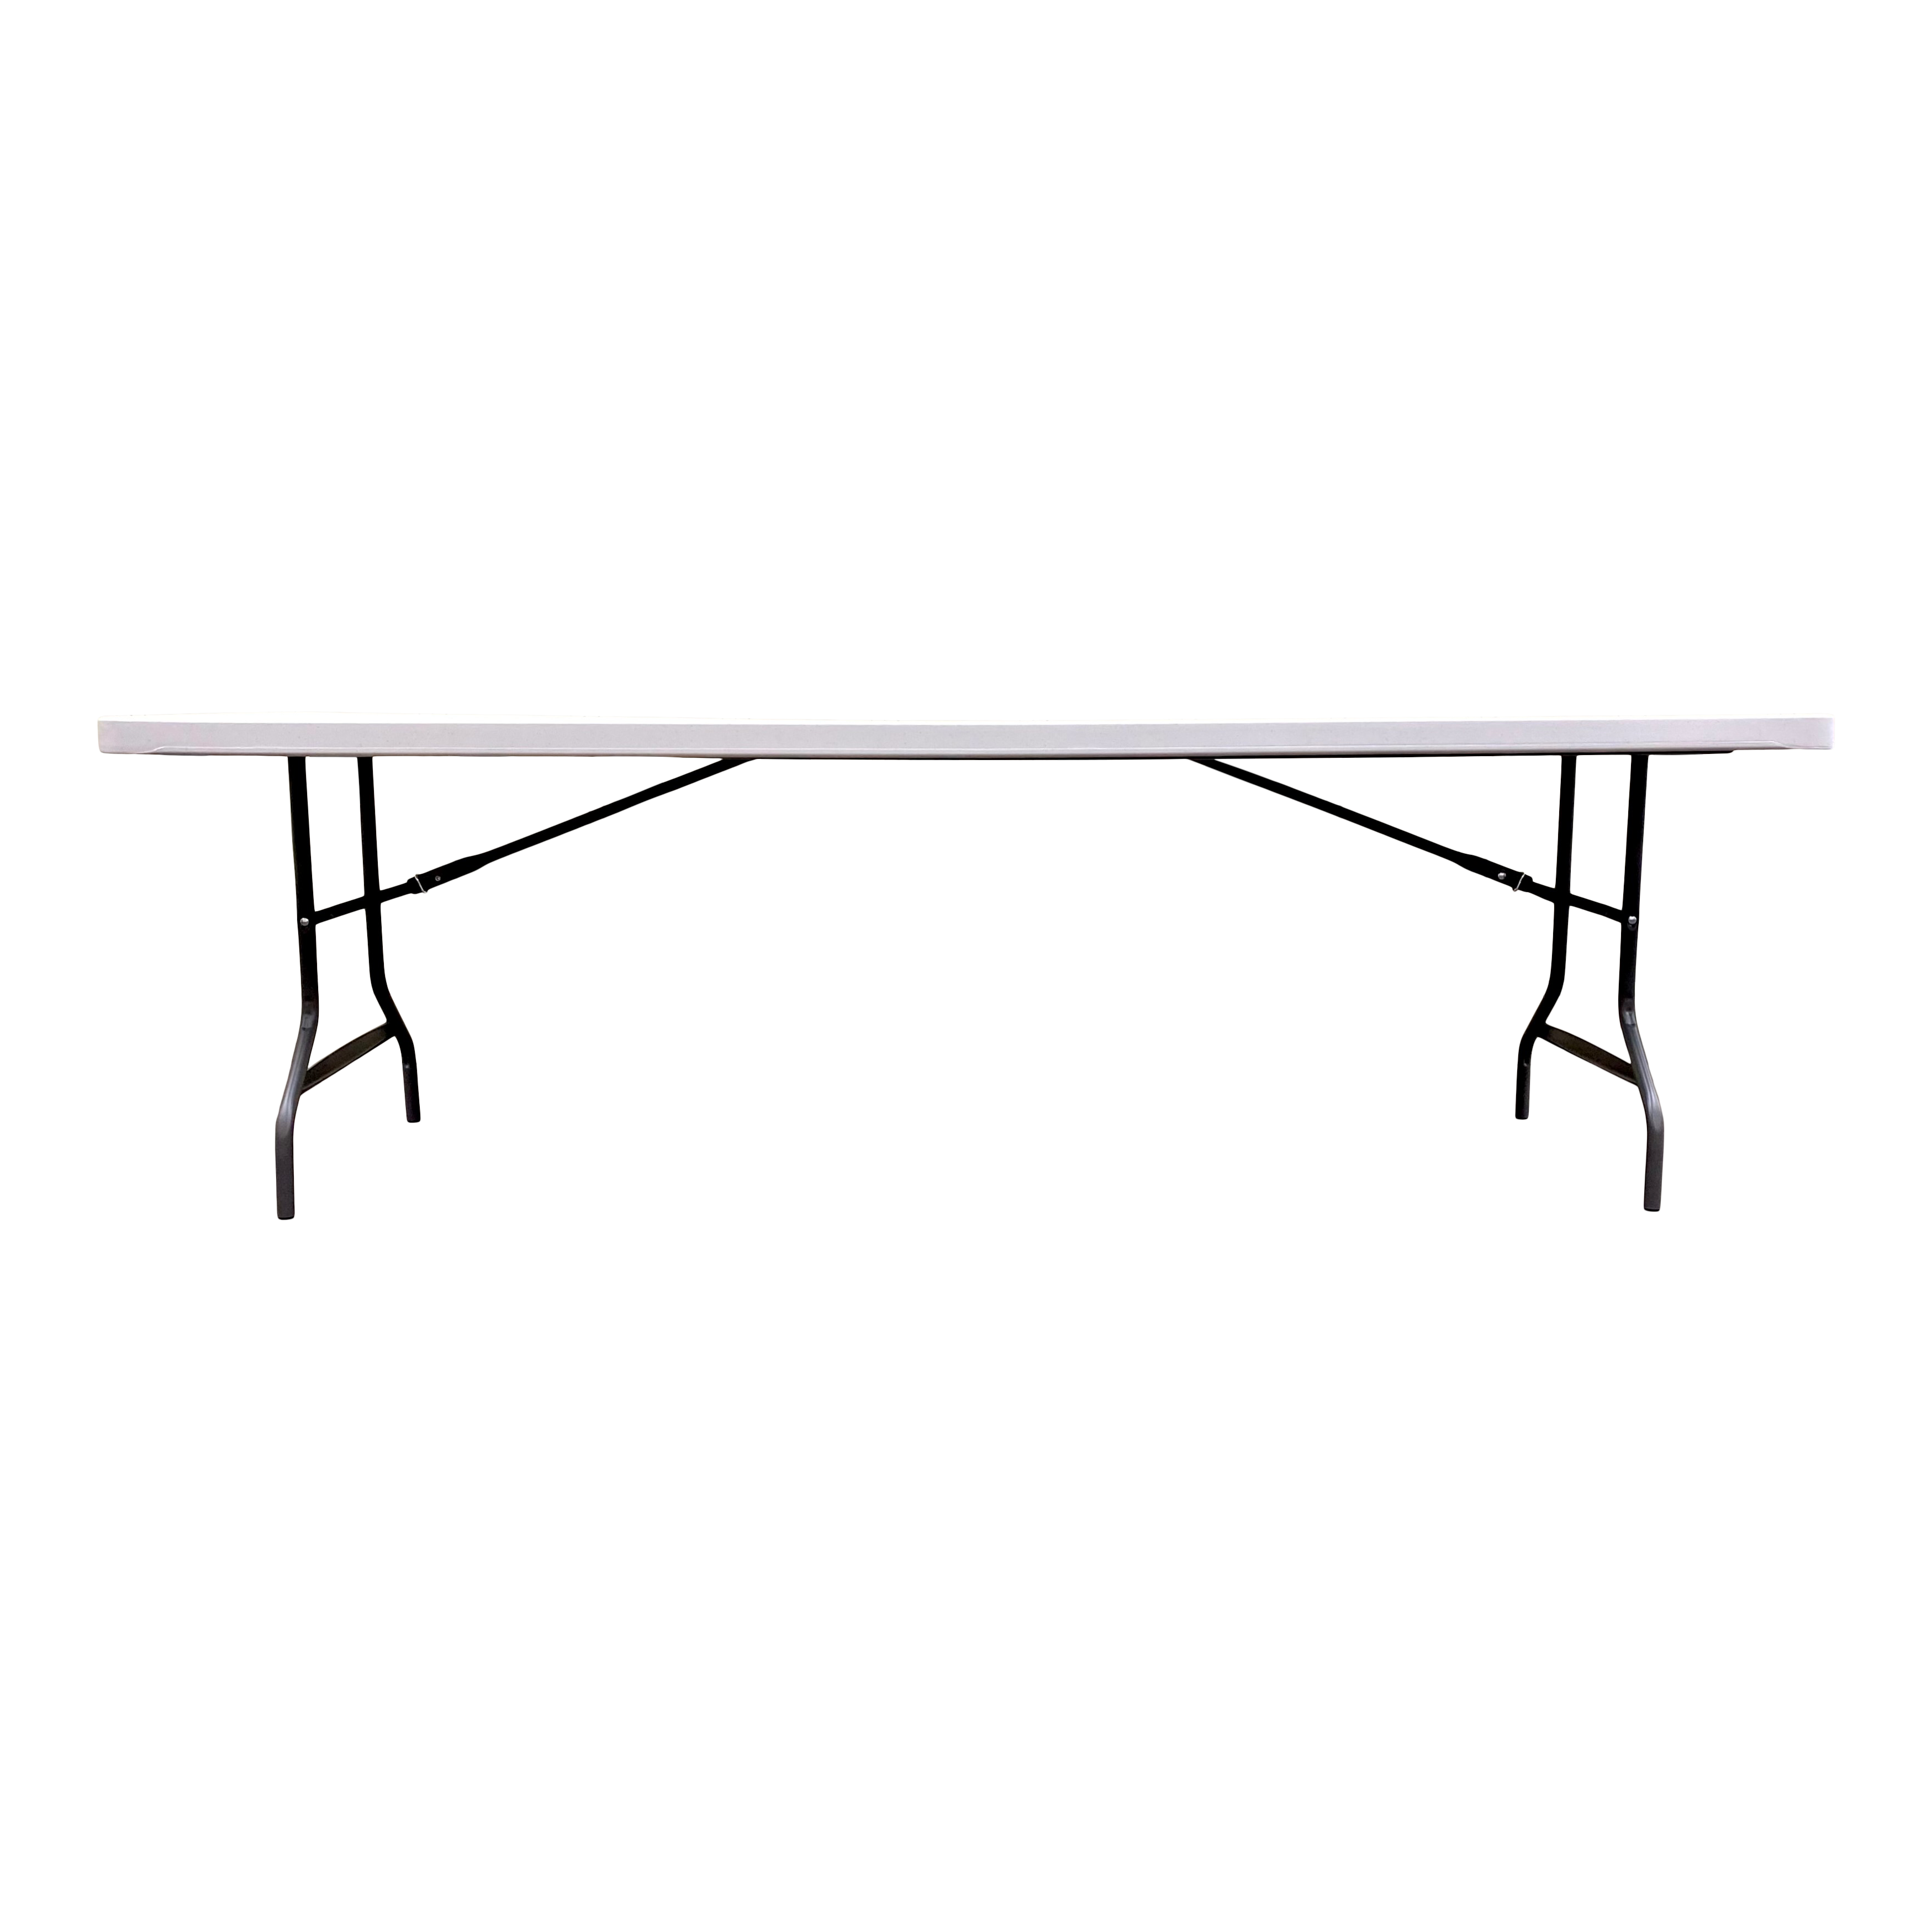 A platinum eight-foot folding table.